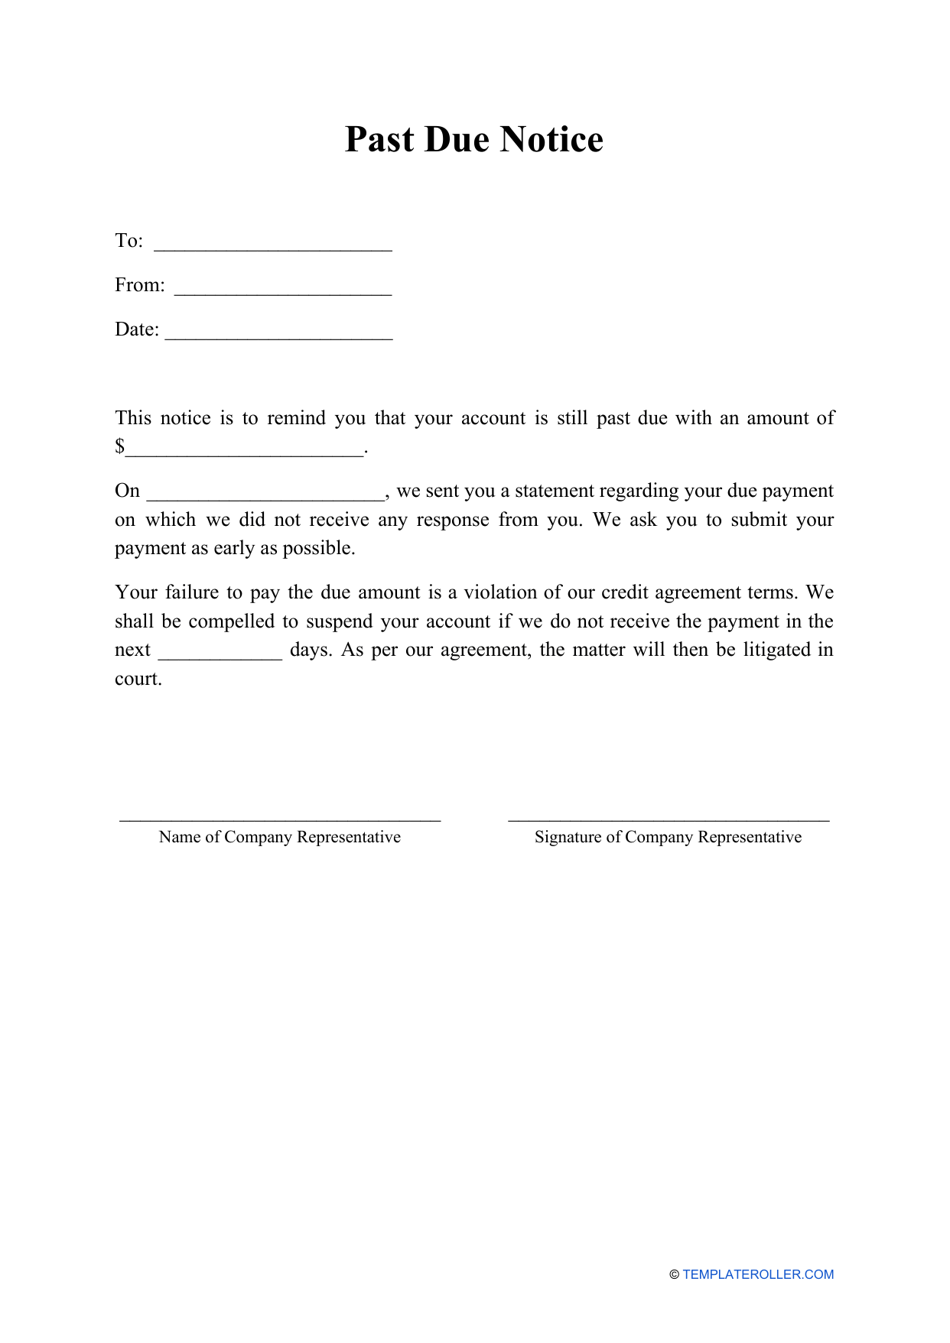 Past Due Notice Template, Page 1